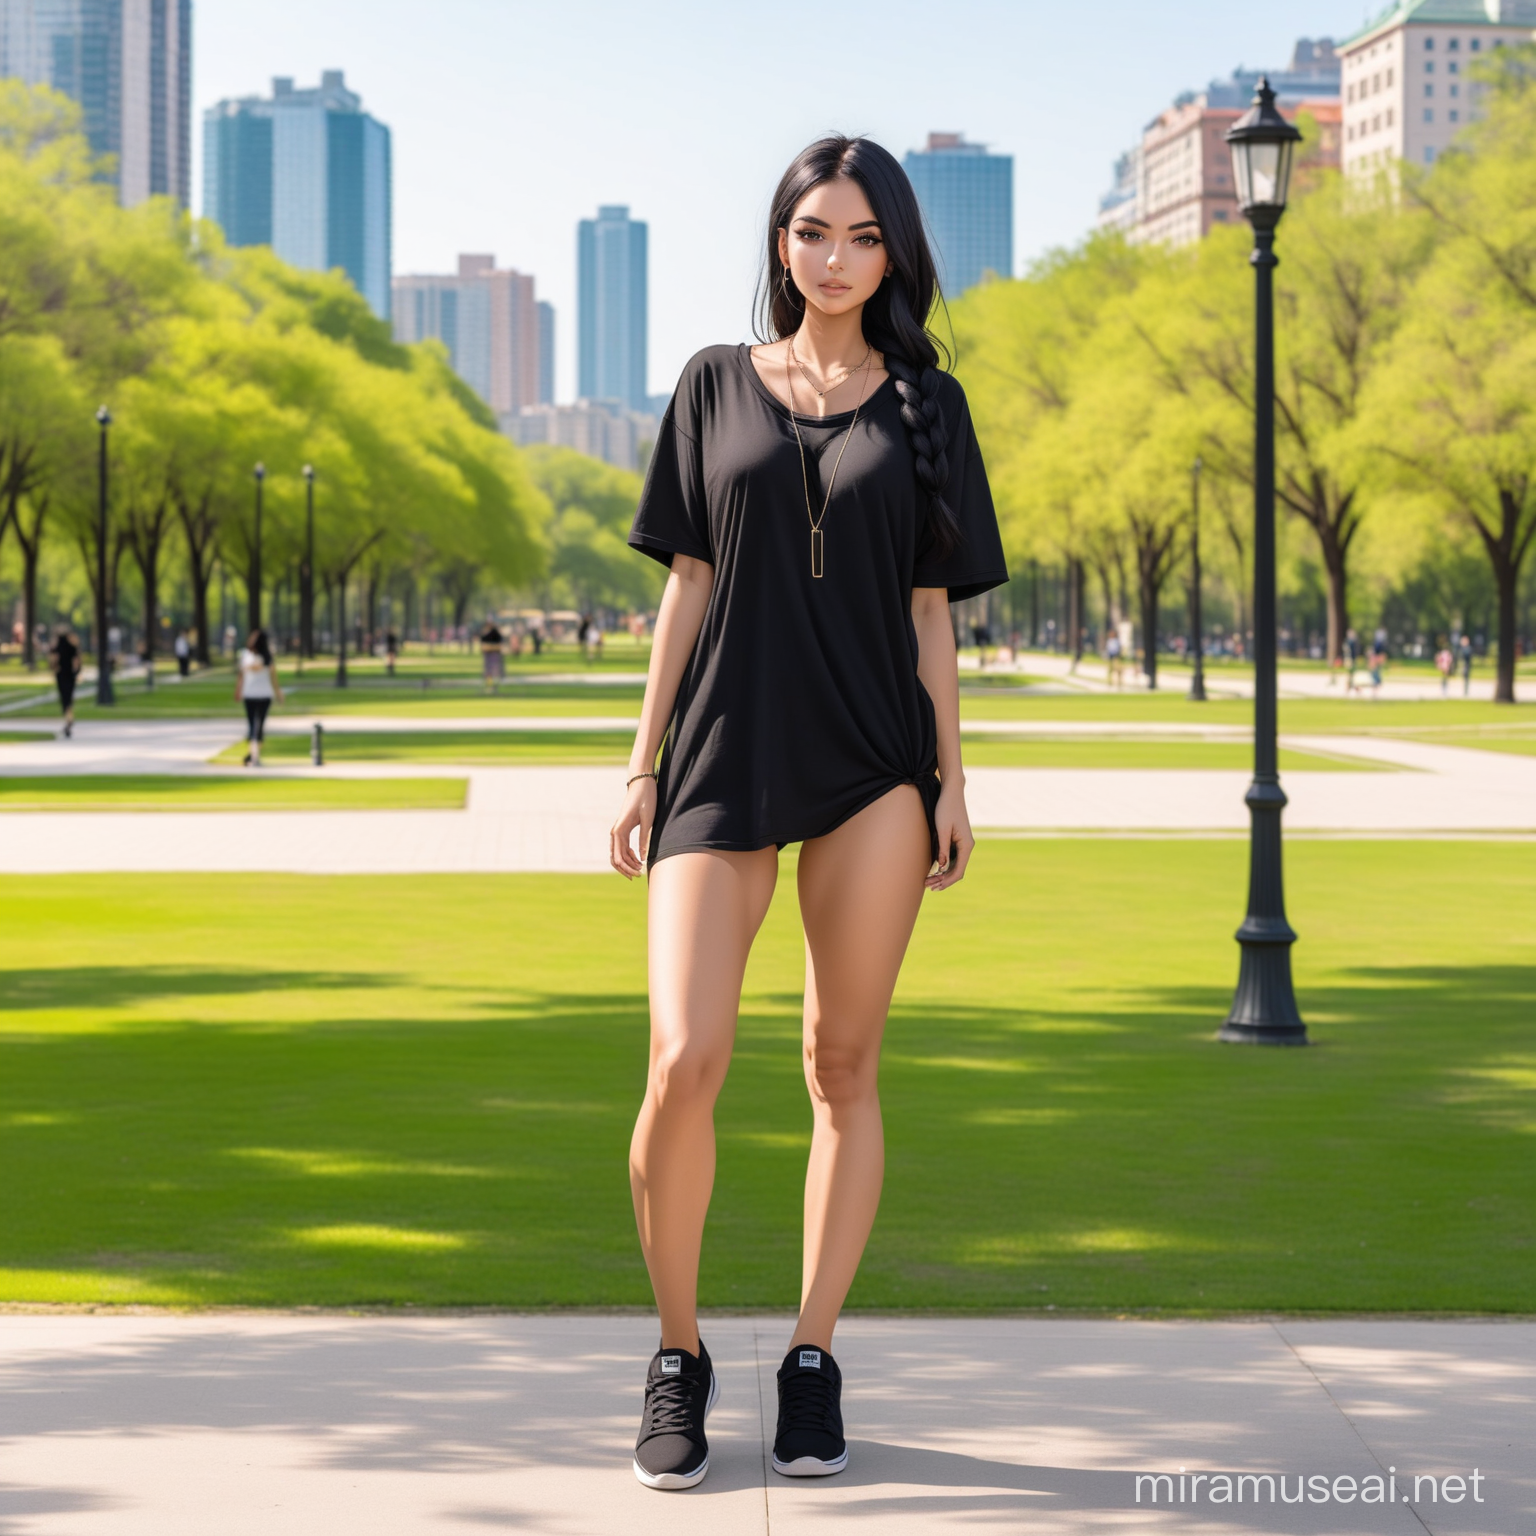 Young Latina Woman Standing in City Park